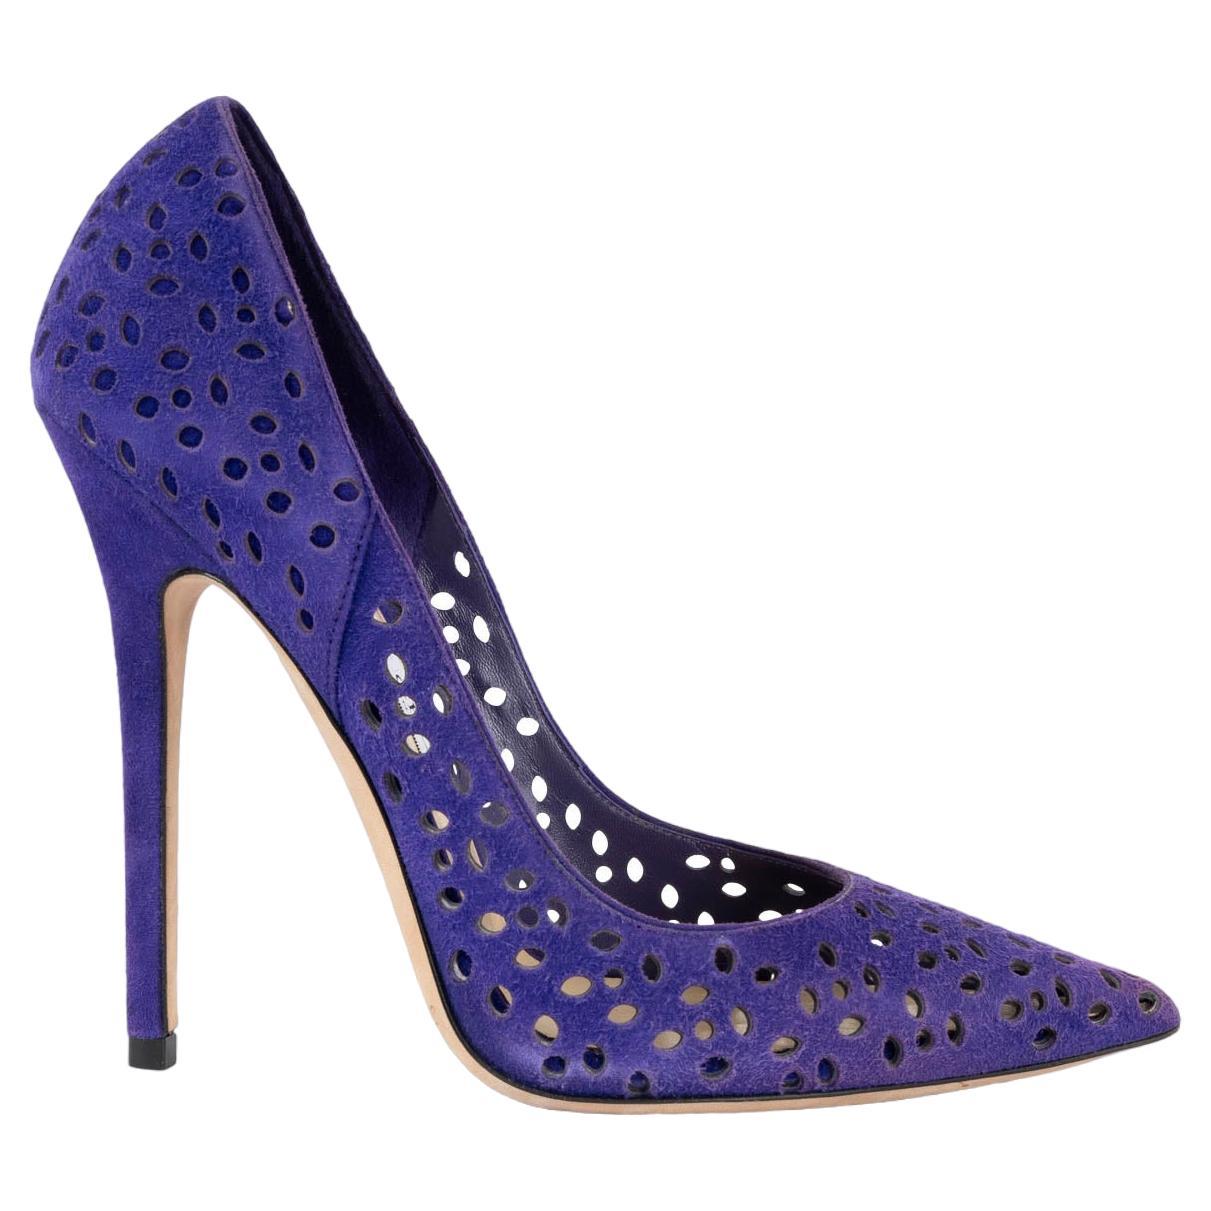 Chaussures JIMMY CHOO PERFORATED ANOUK en daim violet 37,5